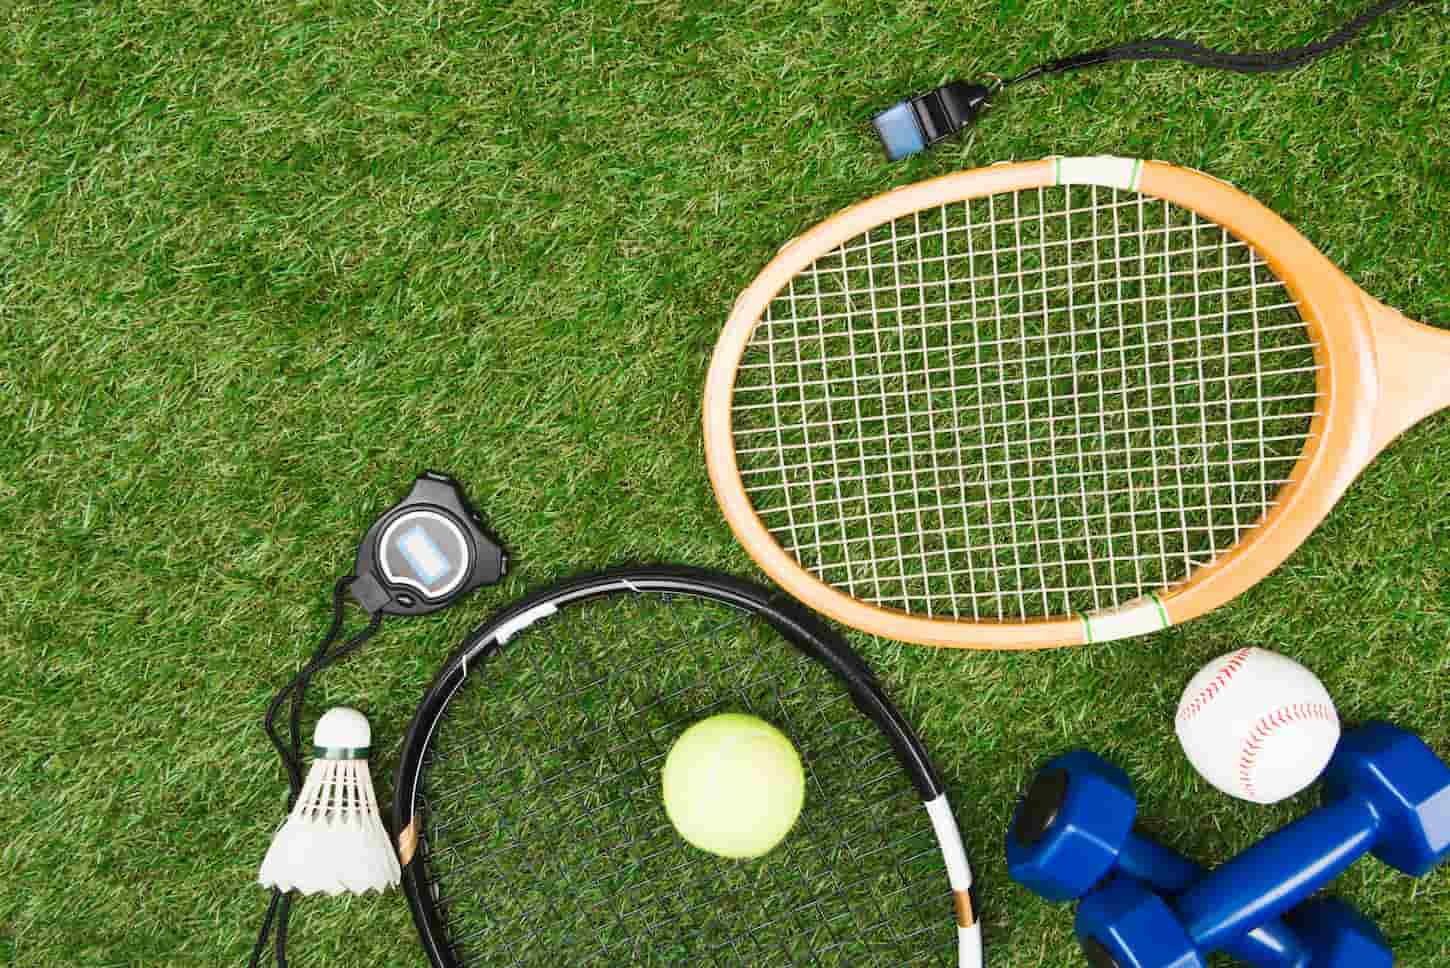 Tennis Vs Badminton (What Are The Differences)